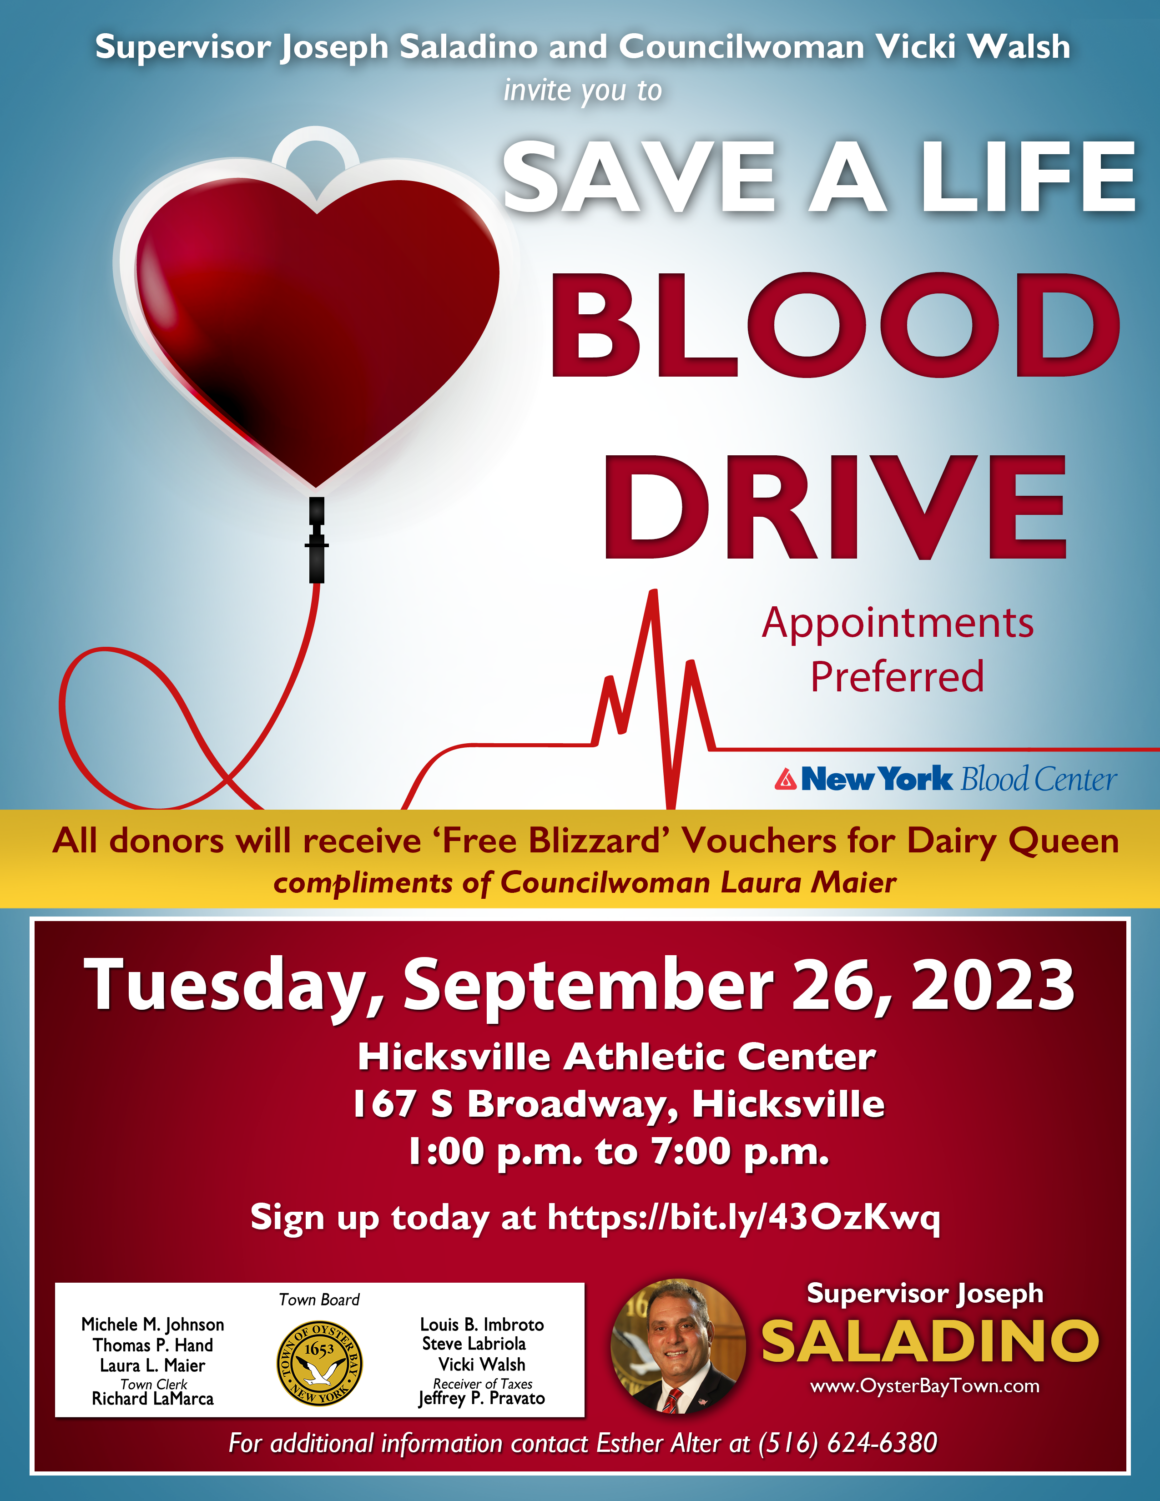 Walsh Urges Residents to Give the Gift of Life by Donating Blood on September 26th